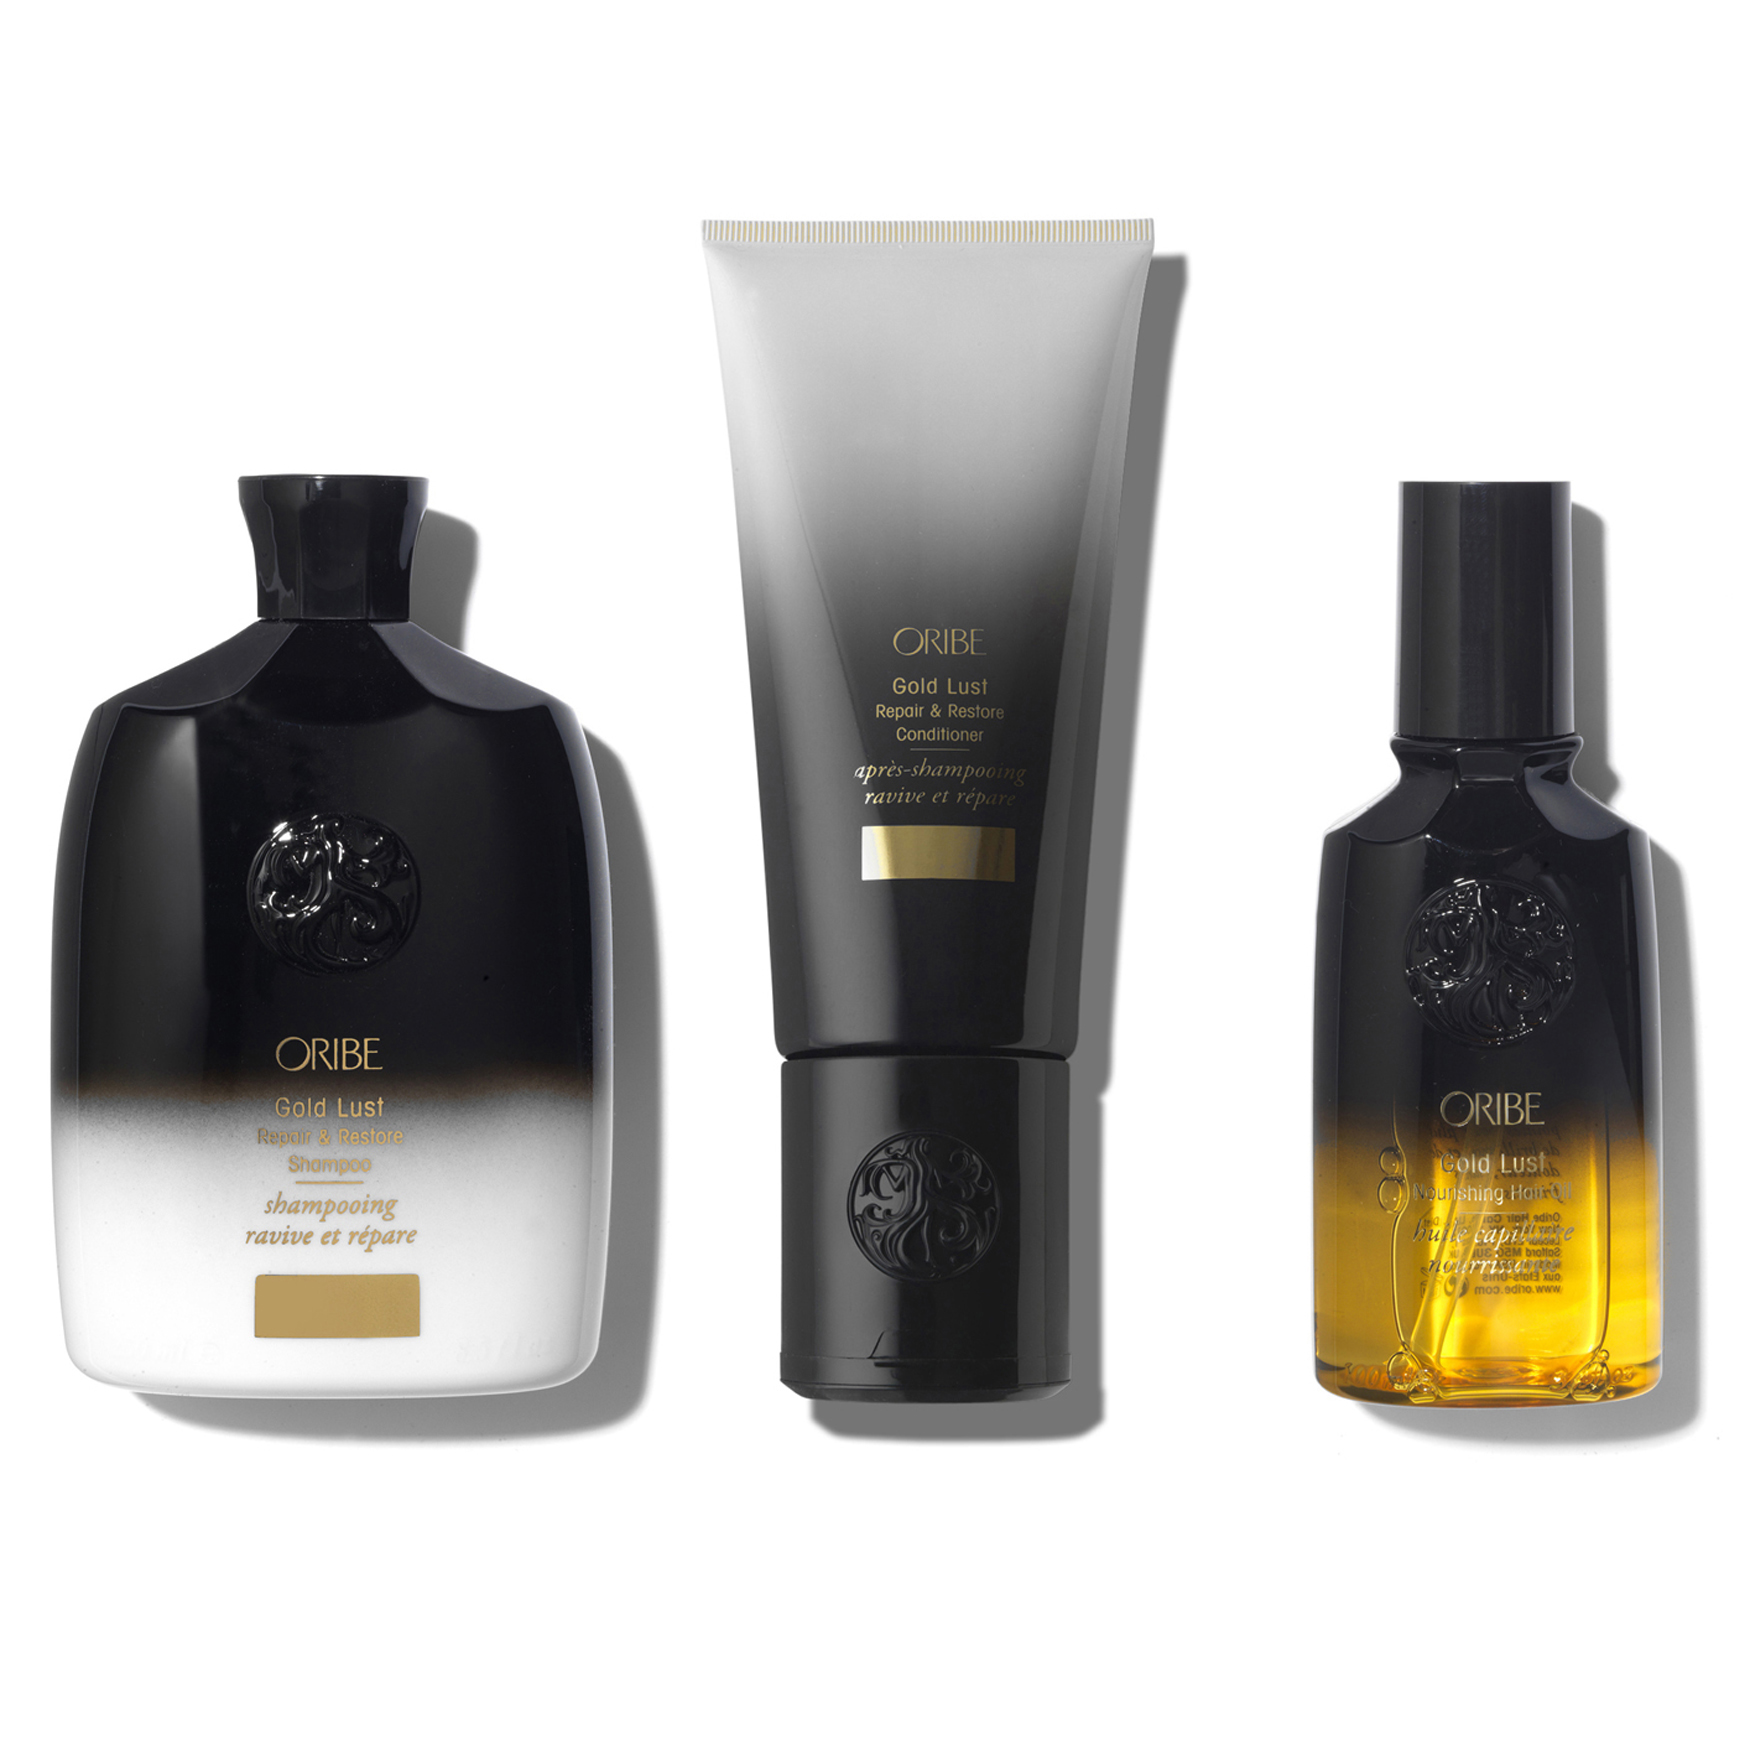 Oribe Gold Lust Collection | Space NK